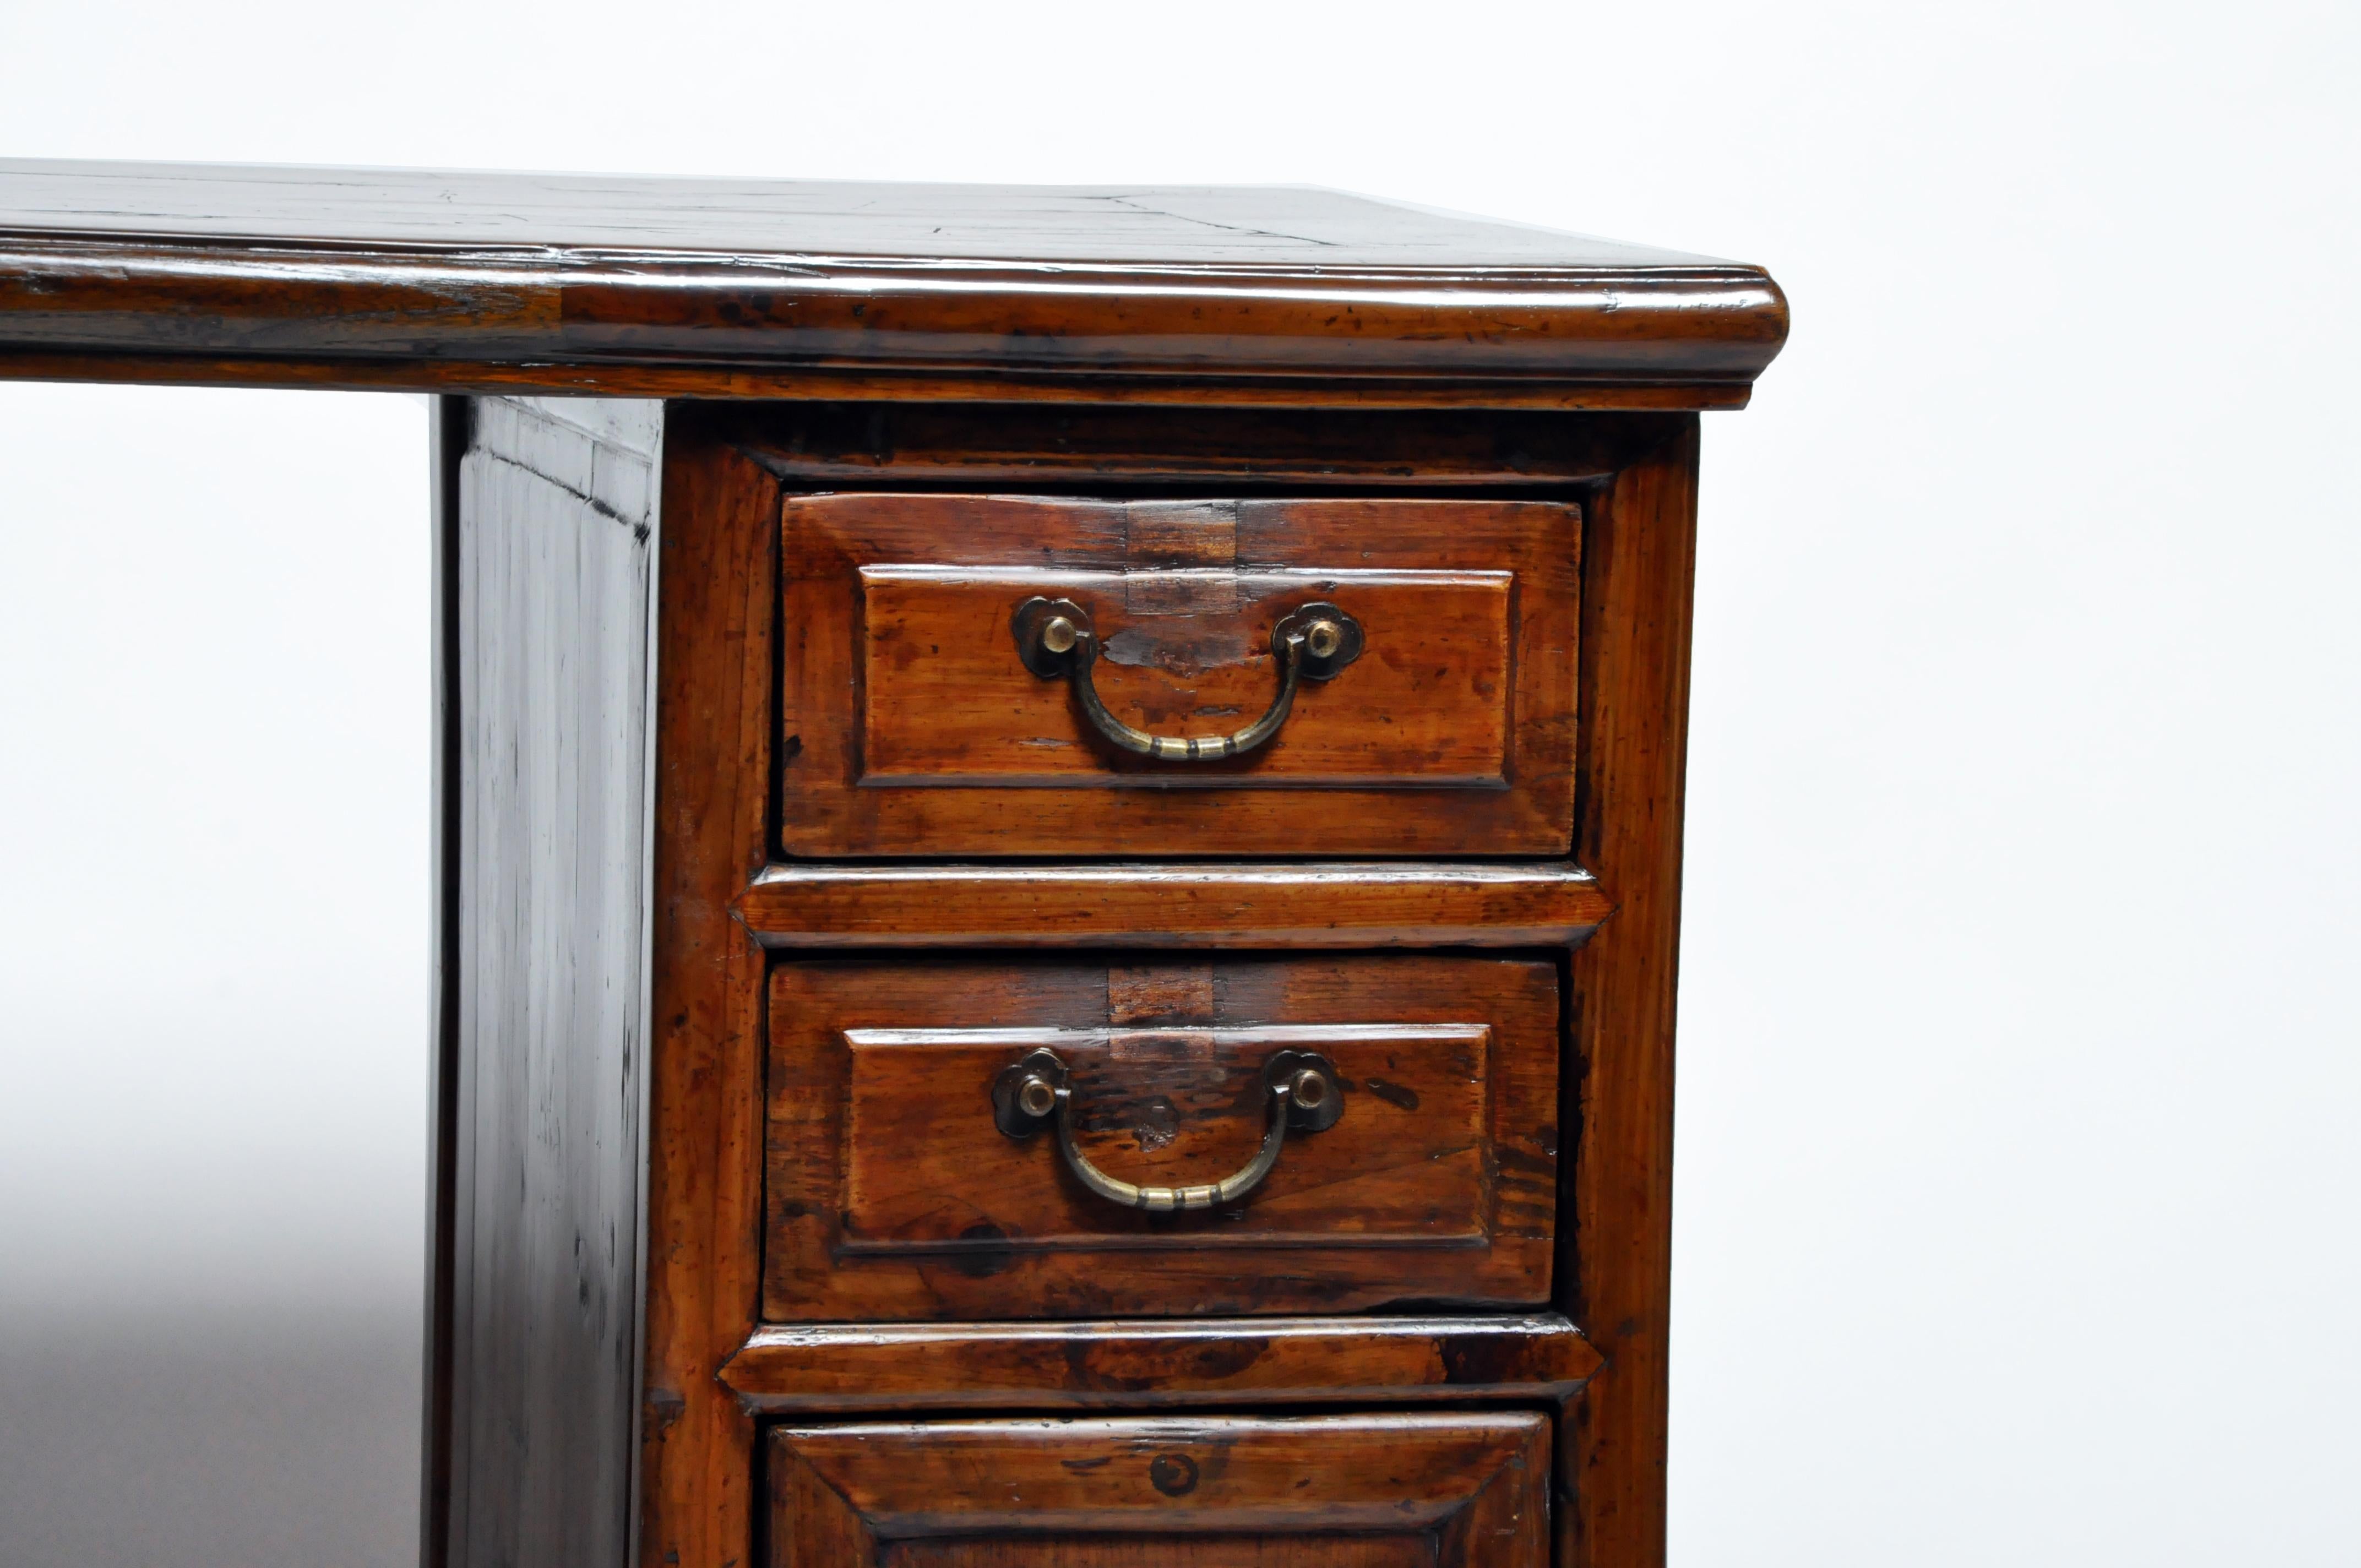 British Colonial Wooden Desk with Four Drawers and Two Doors 1